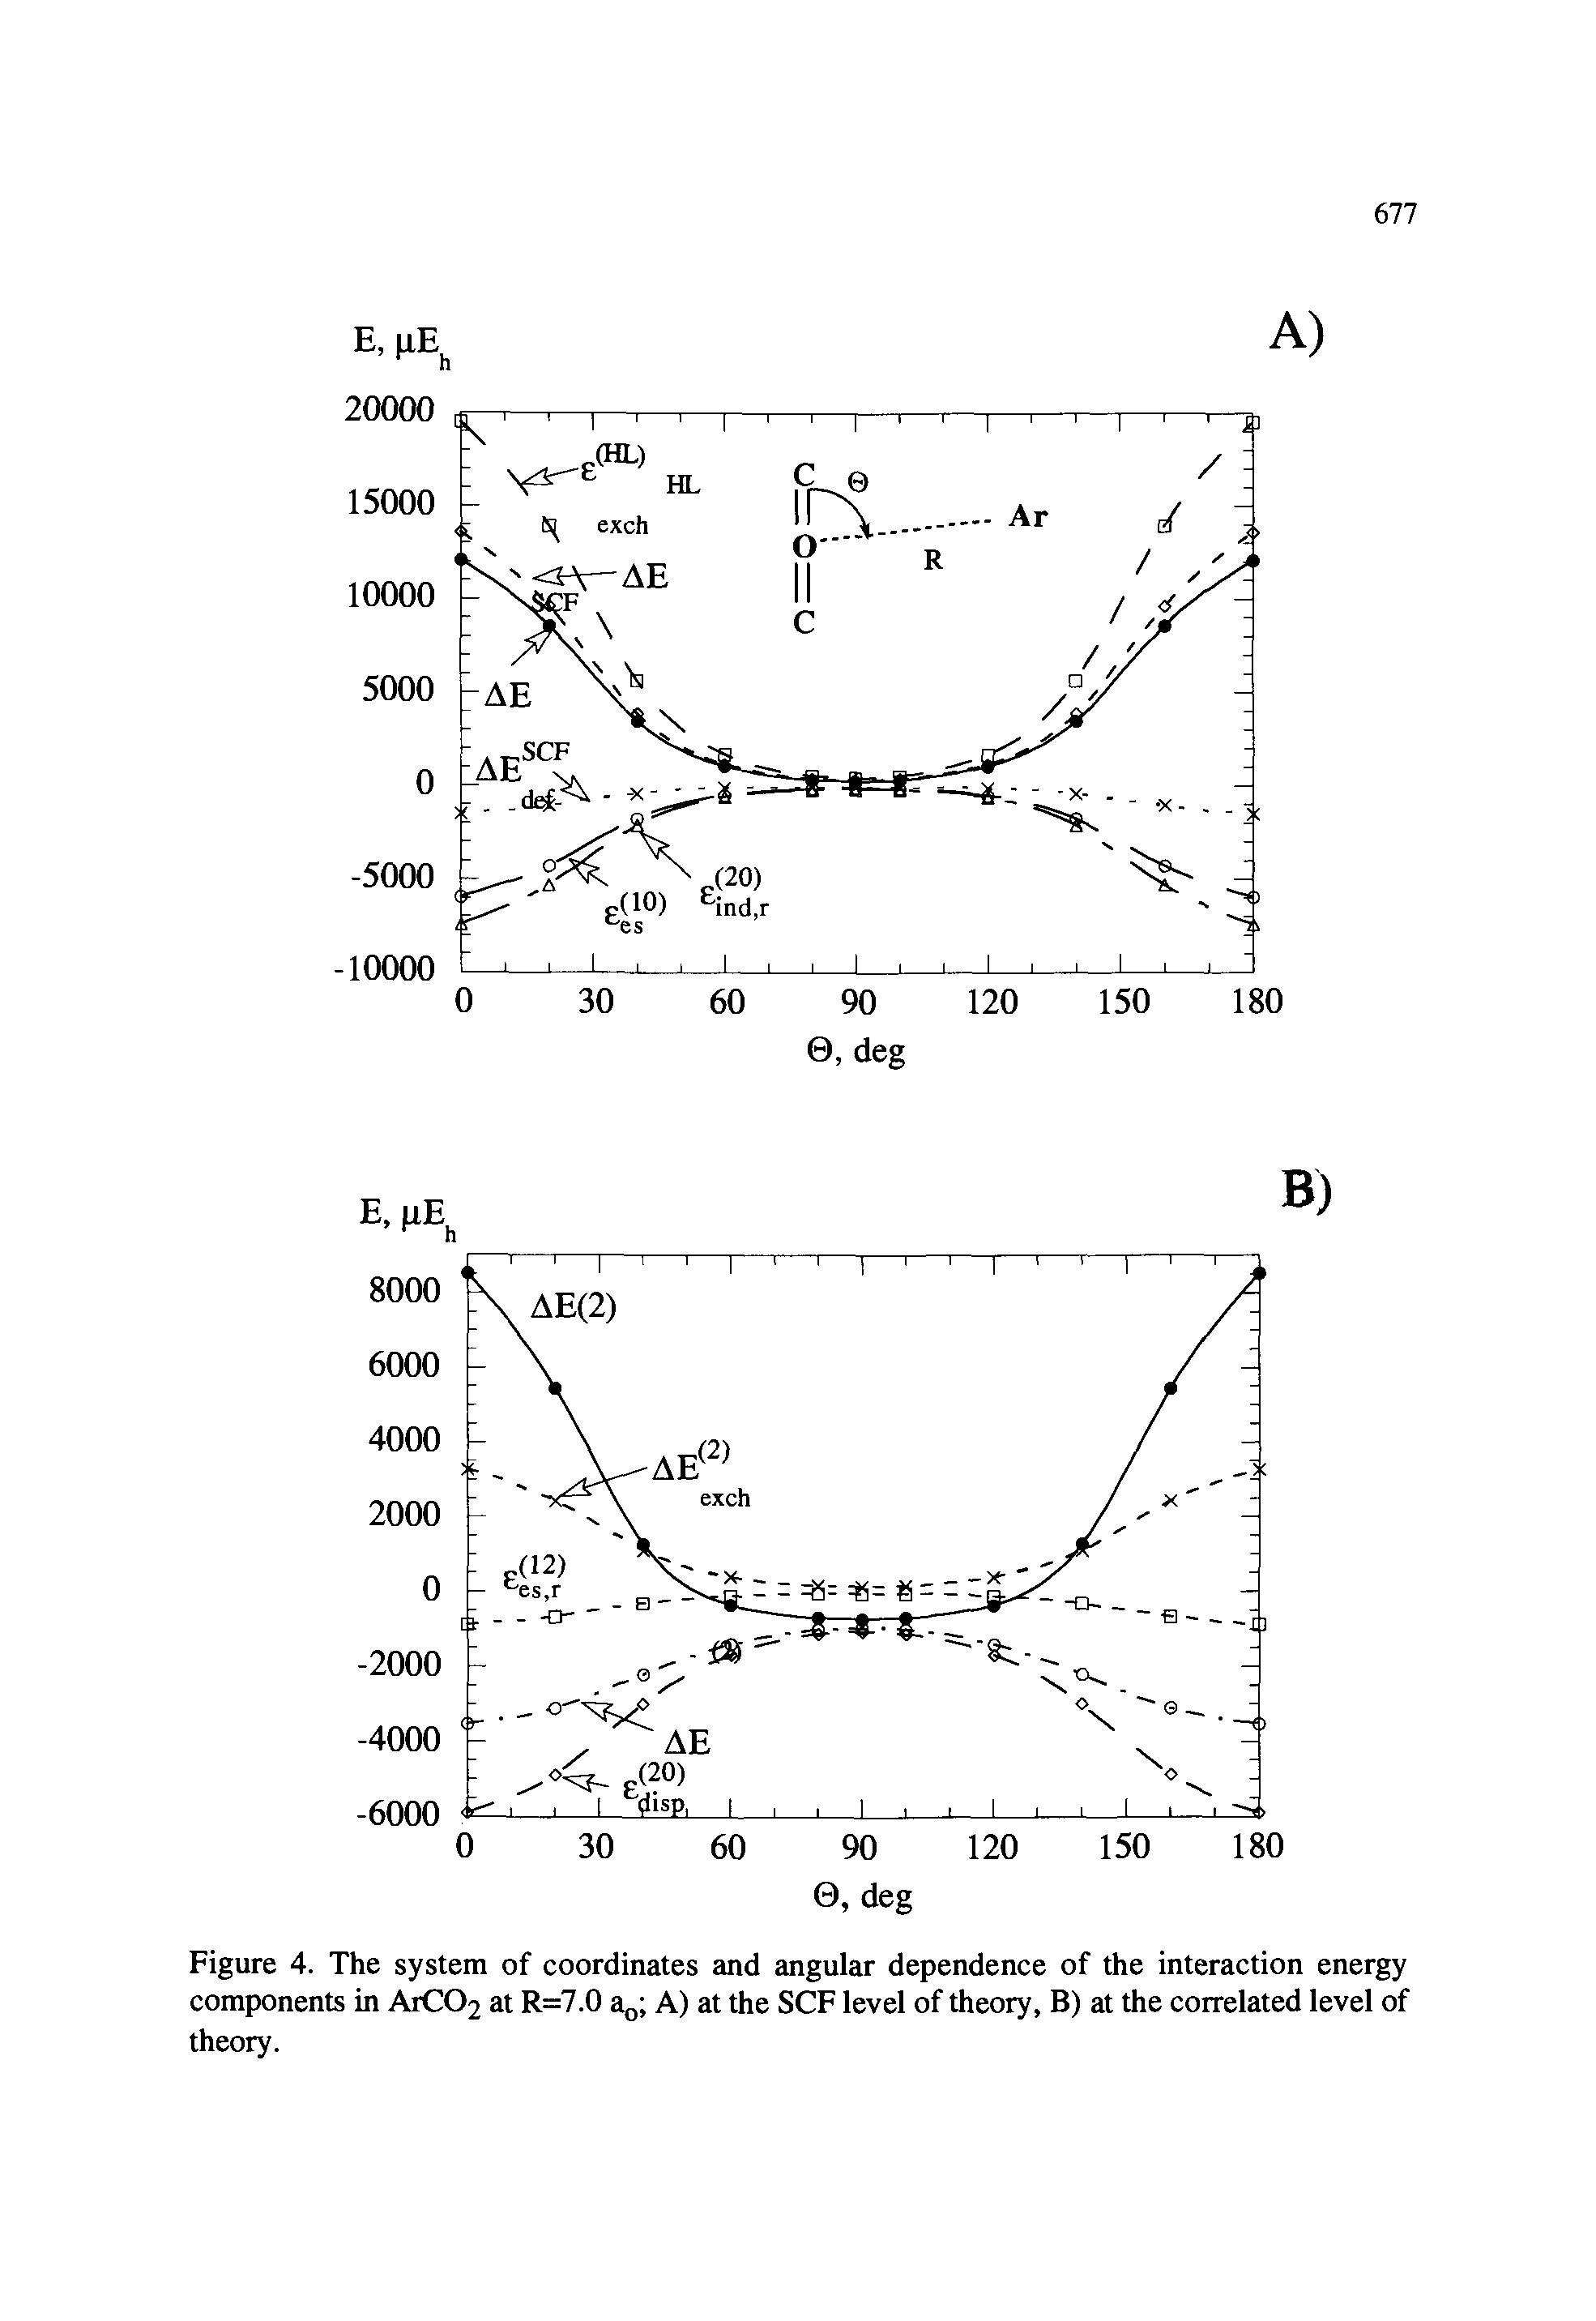 Figure 4. The system of coordinates and angular dependence of the interaction energy components in ArC02 at R=7.0 aQ A) at the SCF level of theory, B) at the correlated level of theory.